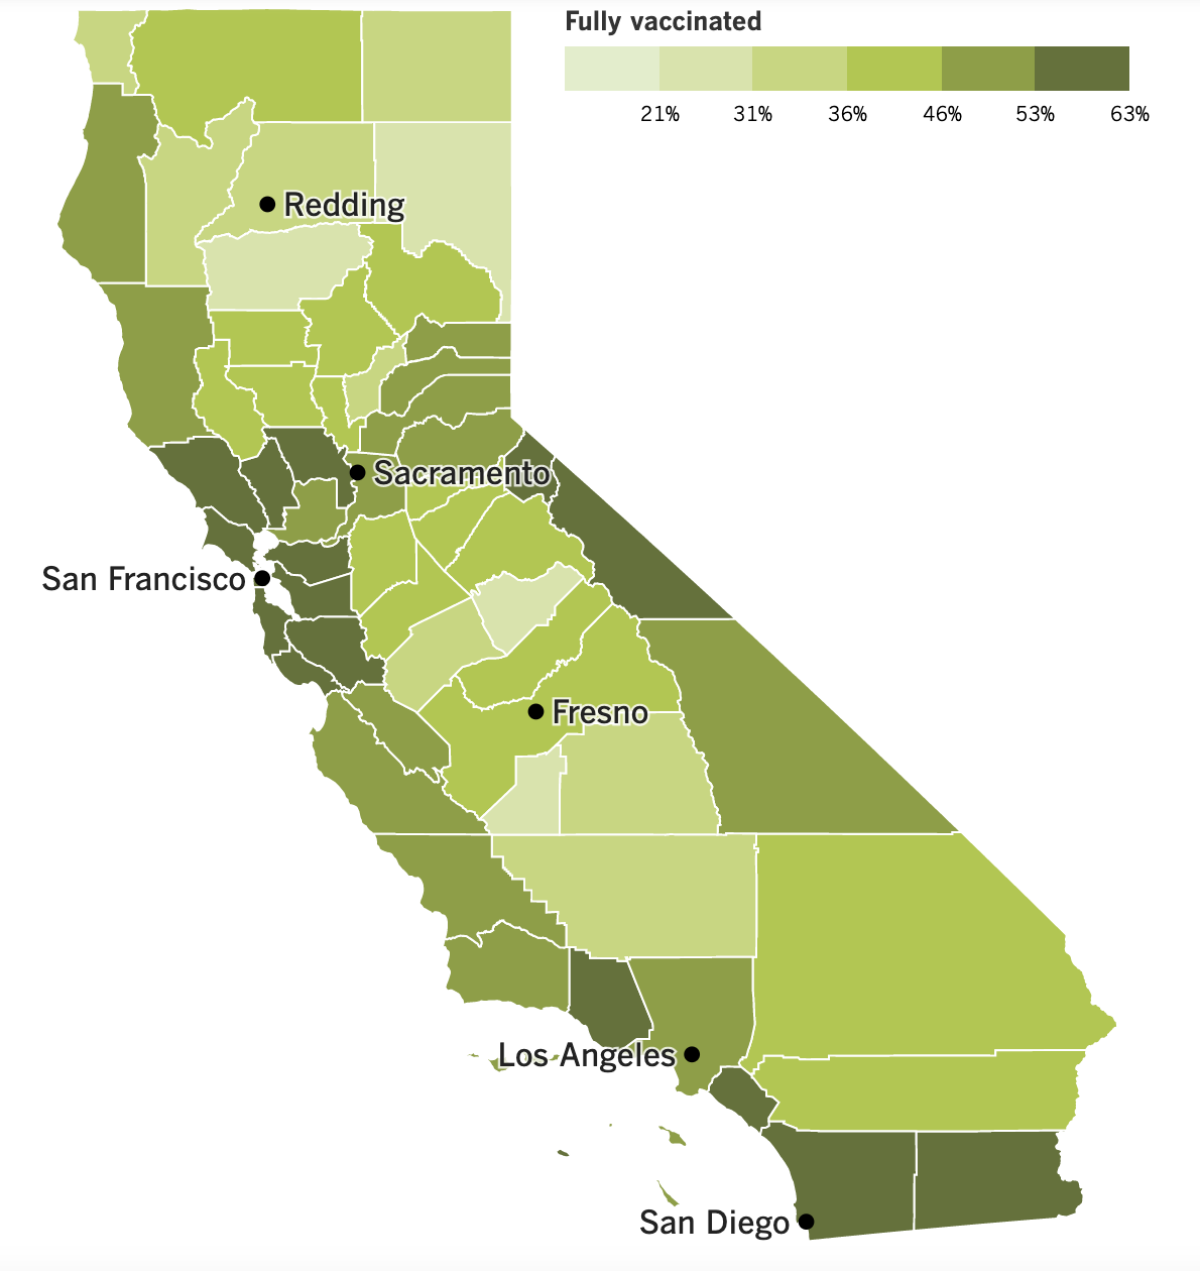 A California map showing vaccination rates by county as of July 13, 2021.